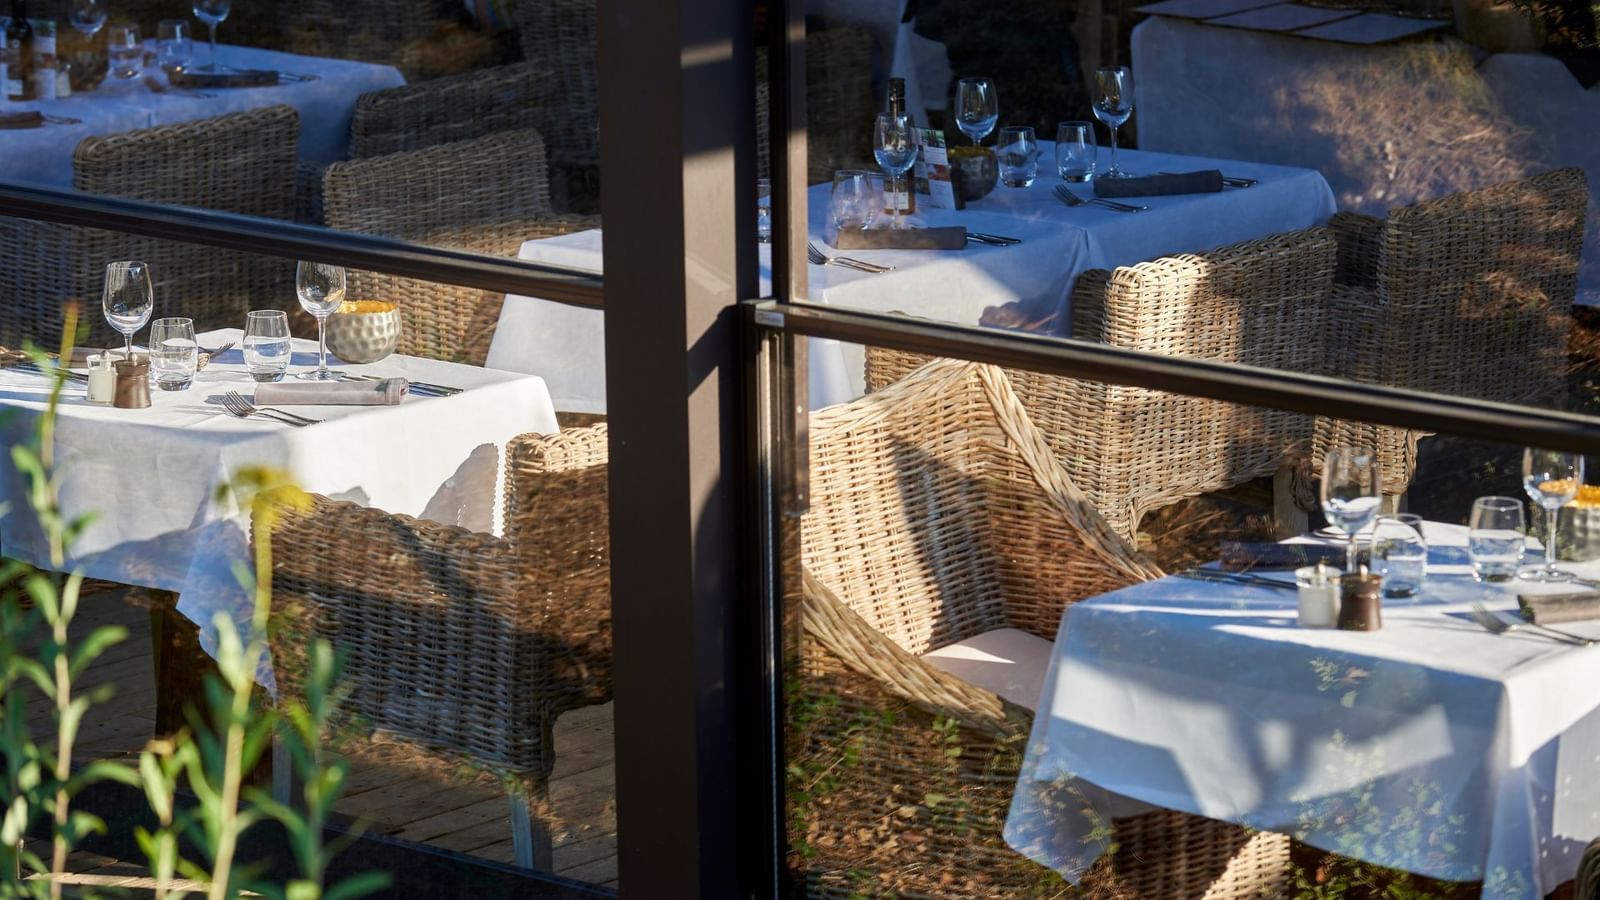 Outdoor dining area in The Bistro at Domaine De Manville